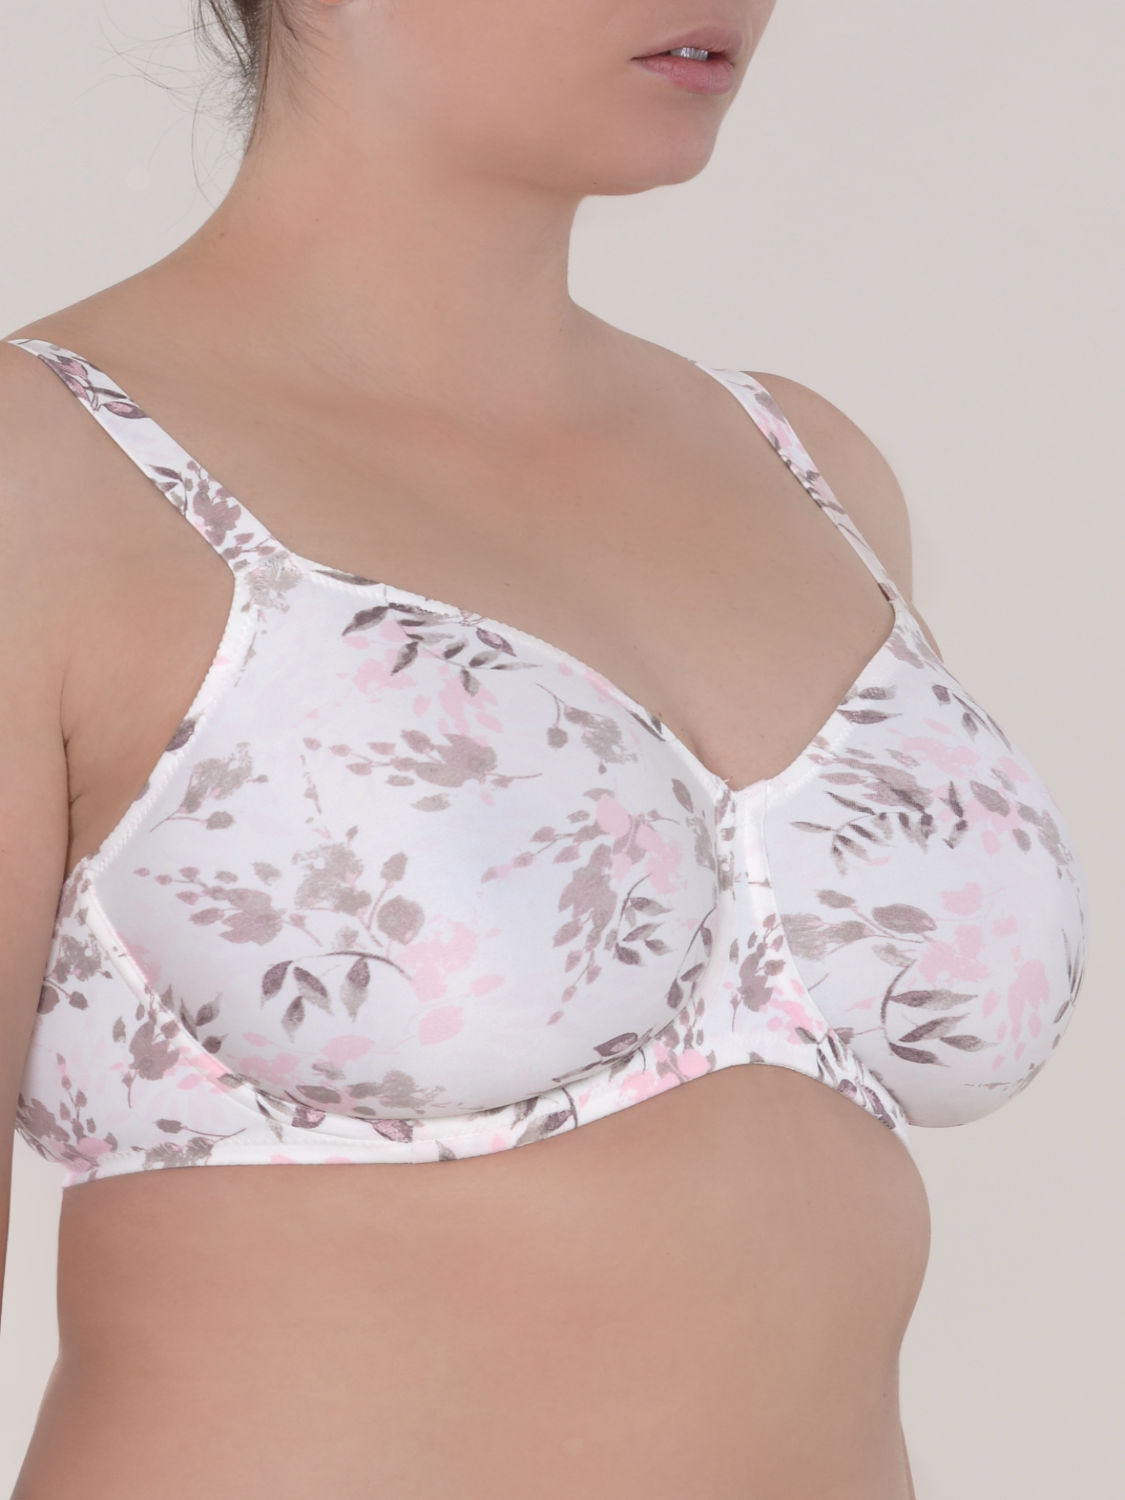 Minimizer Bra - Women's Plus Size Full Padded Underwire Floral